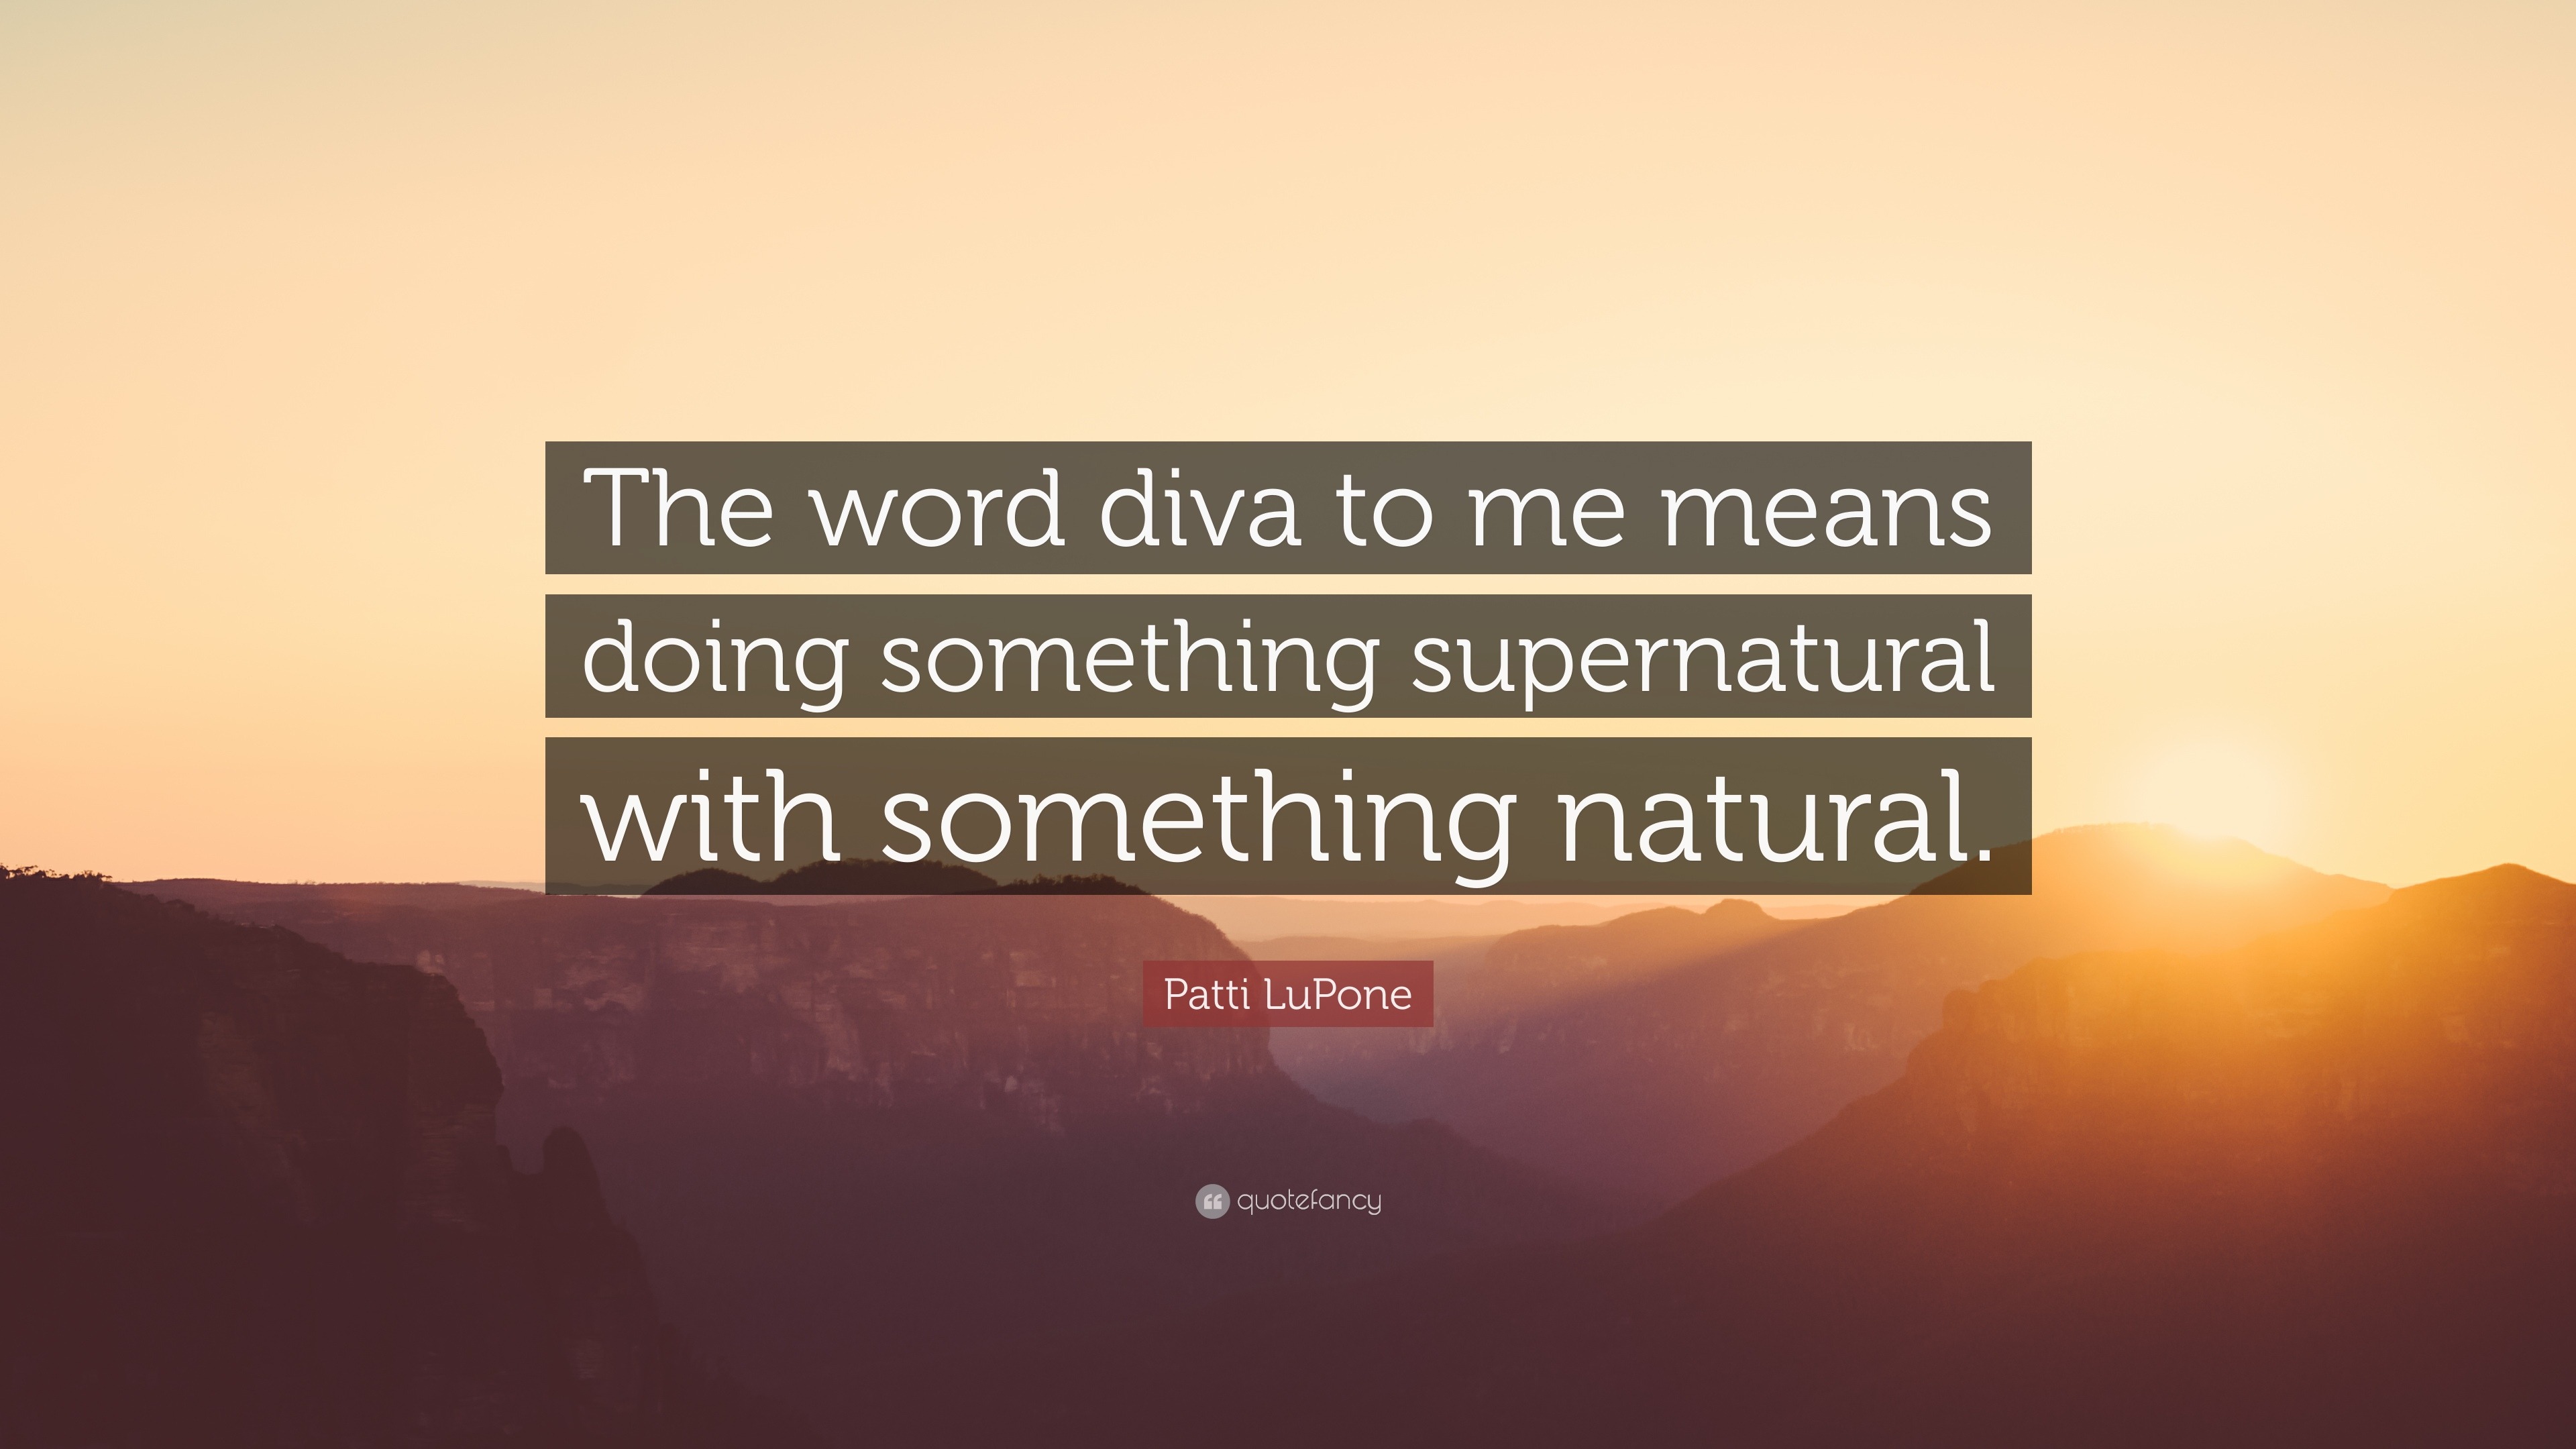 Evne dække over Potentiel Patti LuPone Quote: “The word diva to me means doing something supernatural  with something natural.”